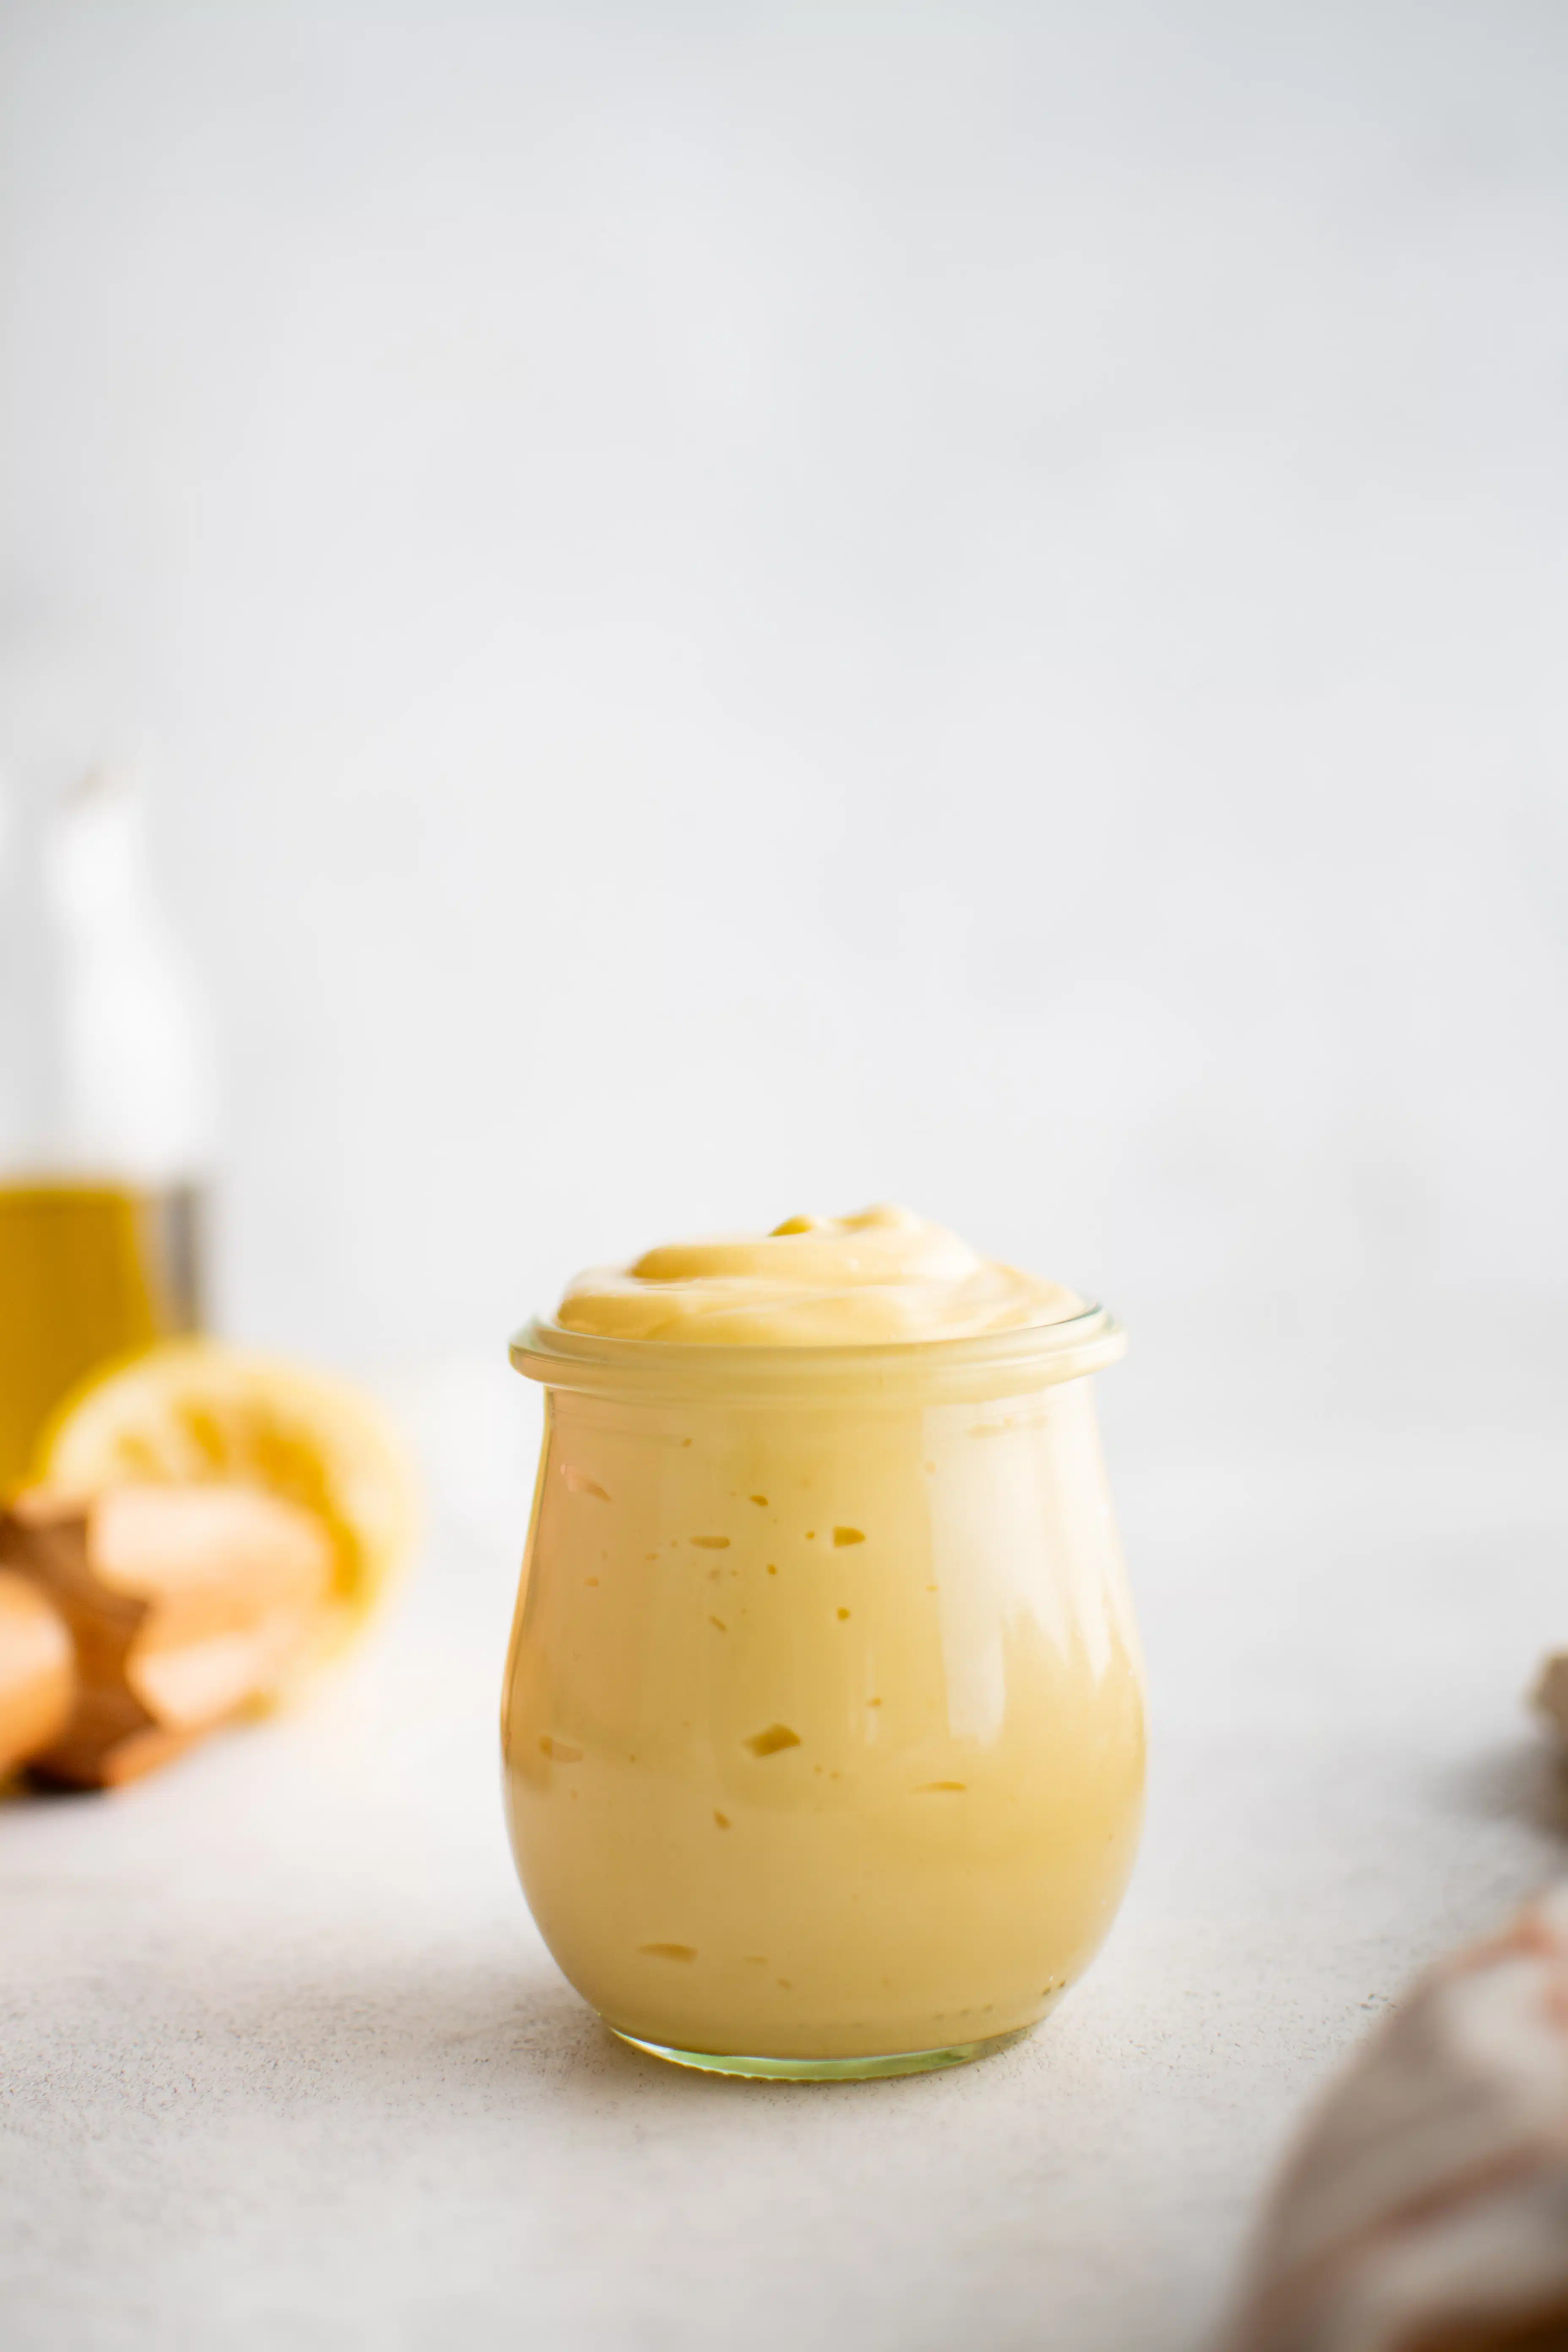 Small glass jar filled with creamy, light yellow colored homemade mayonnaise.